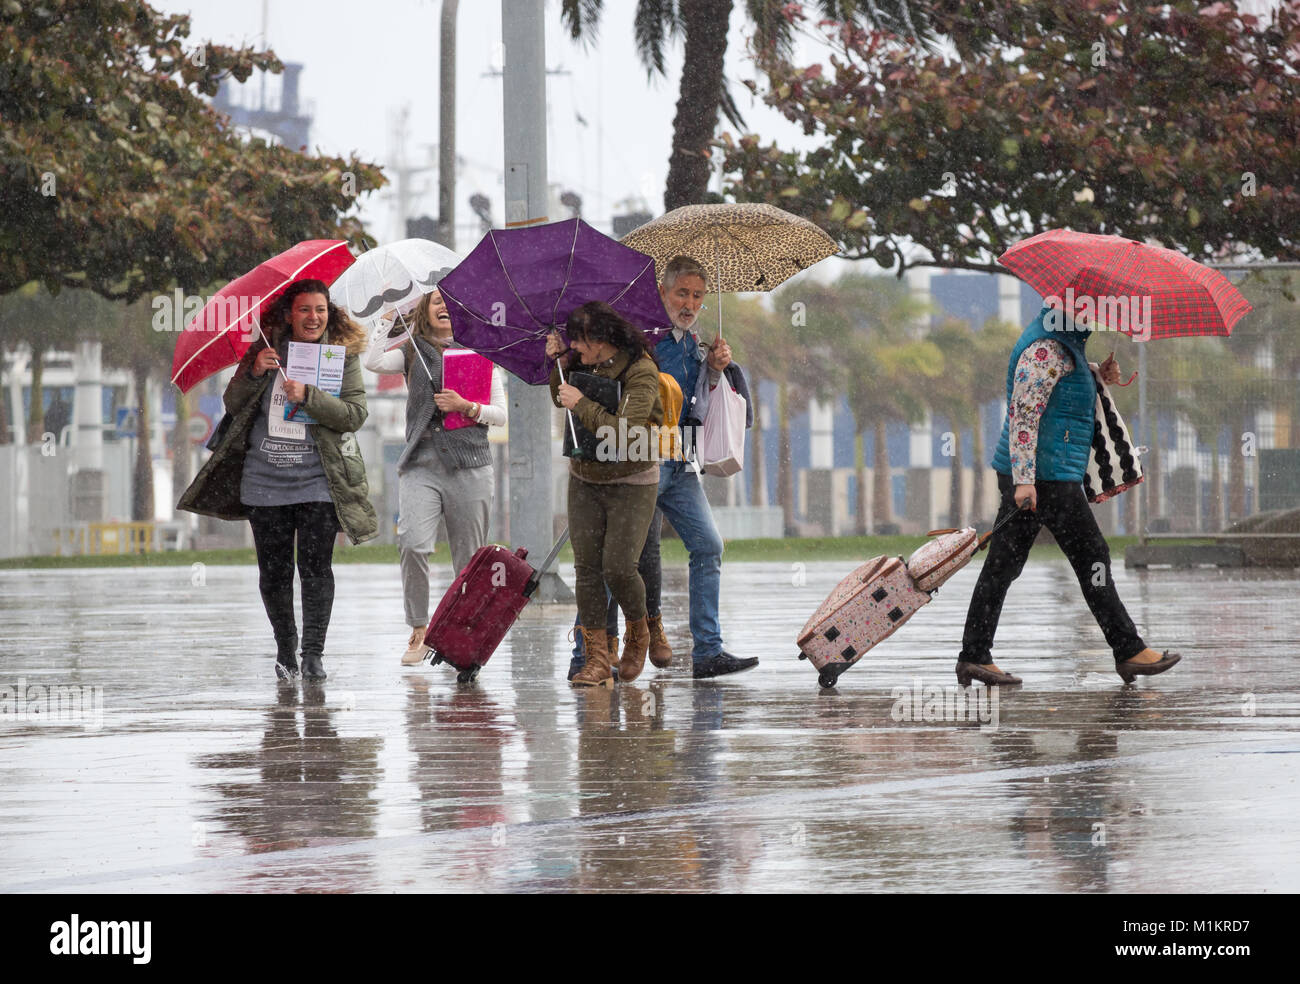 Las Palmas, Gran Canaria, Canary Islands, Spain. 31st January, 2018. Tourists and locals braving wet and windy conditions in Las Palmas on Gran Canaria. A popular sun destination for many